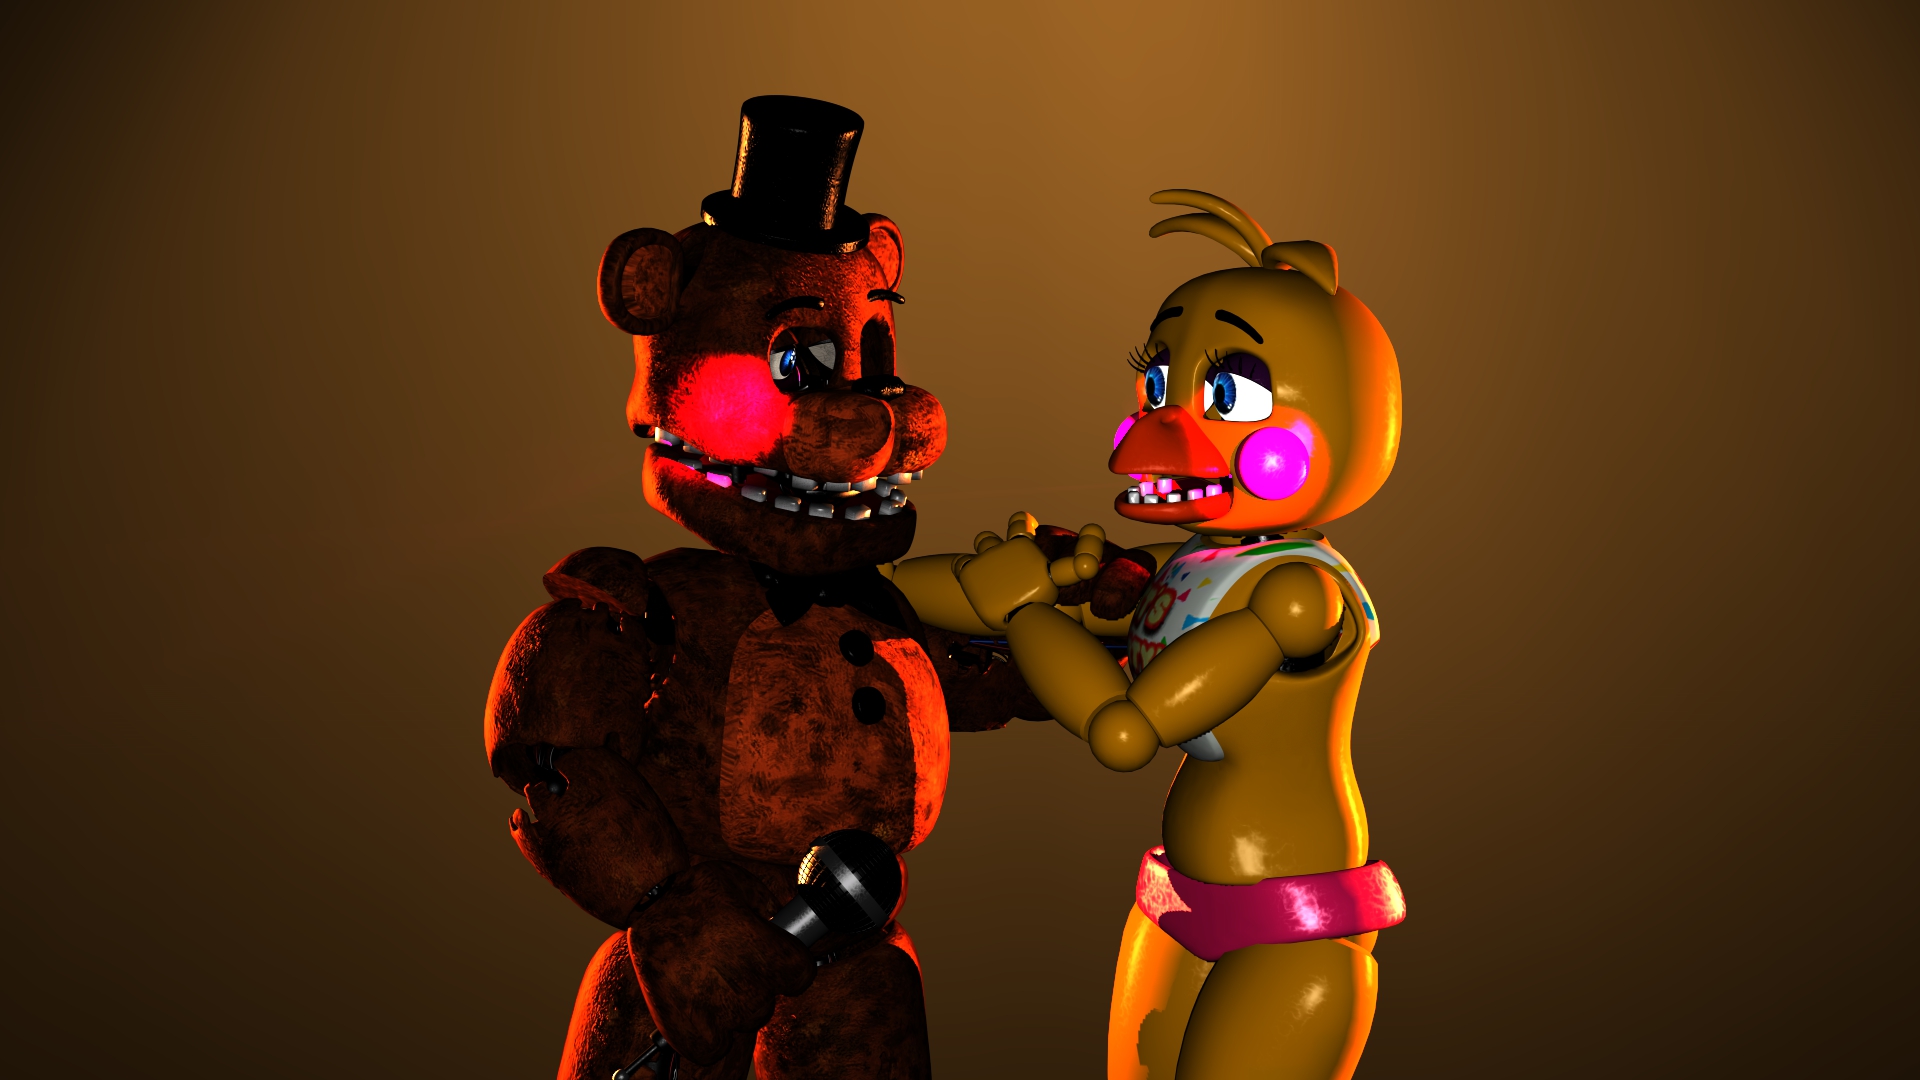 Withered Freddy, Withered Bonnie, Withered Chica, Toy Freddy, The Puppet,  Me, Mangle, Carl, and Nightmare Bonnie!❤✌